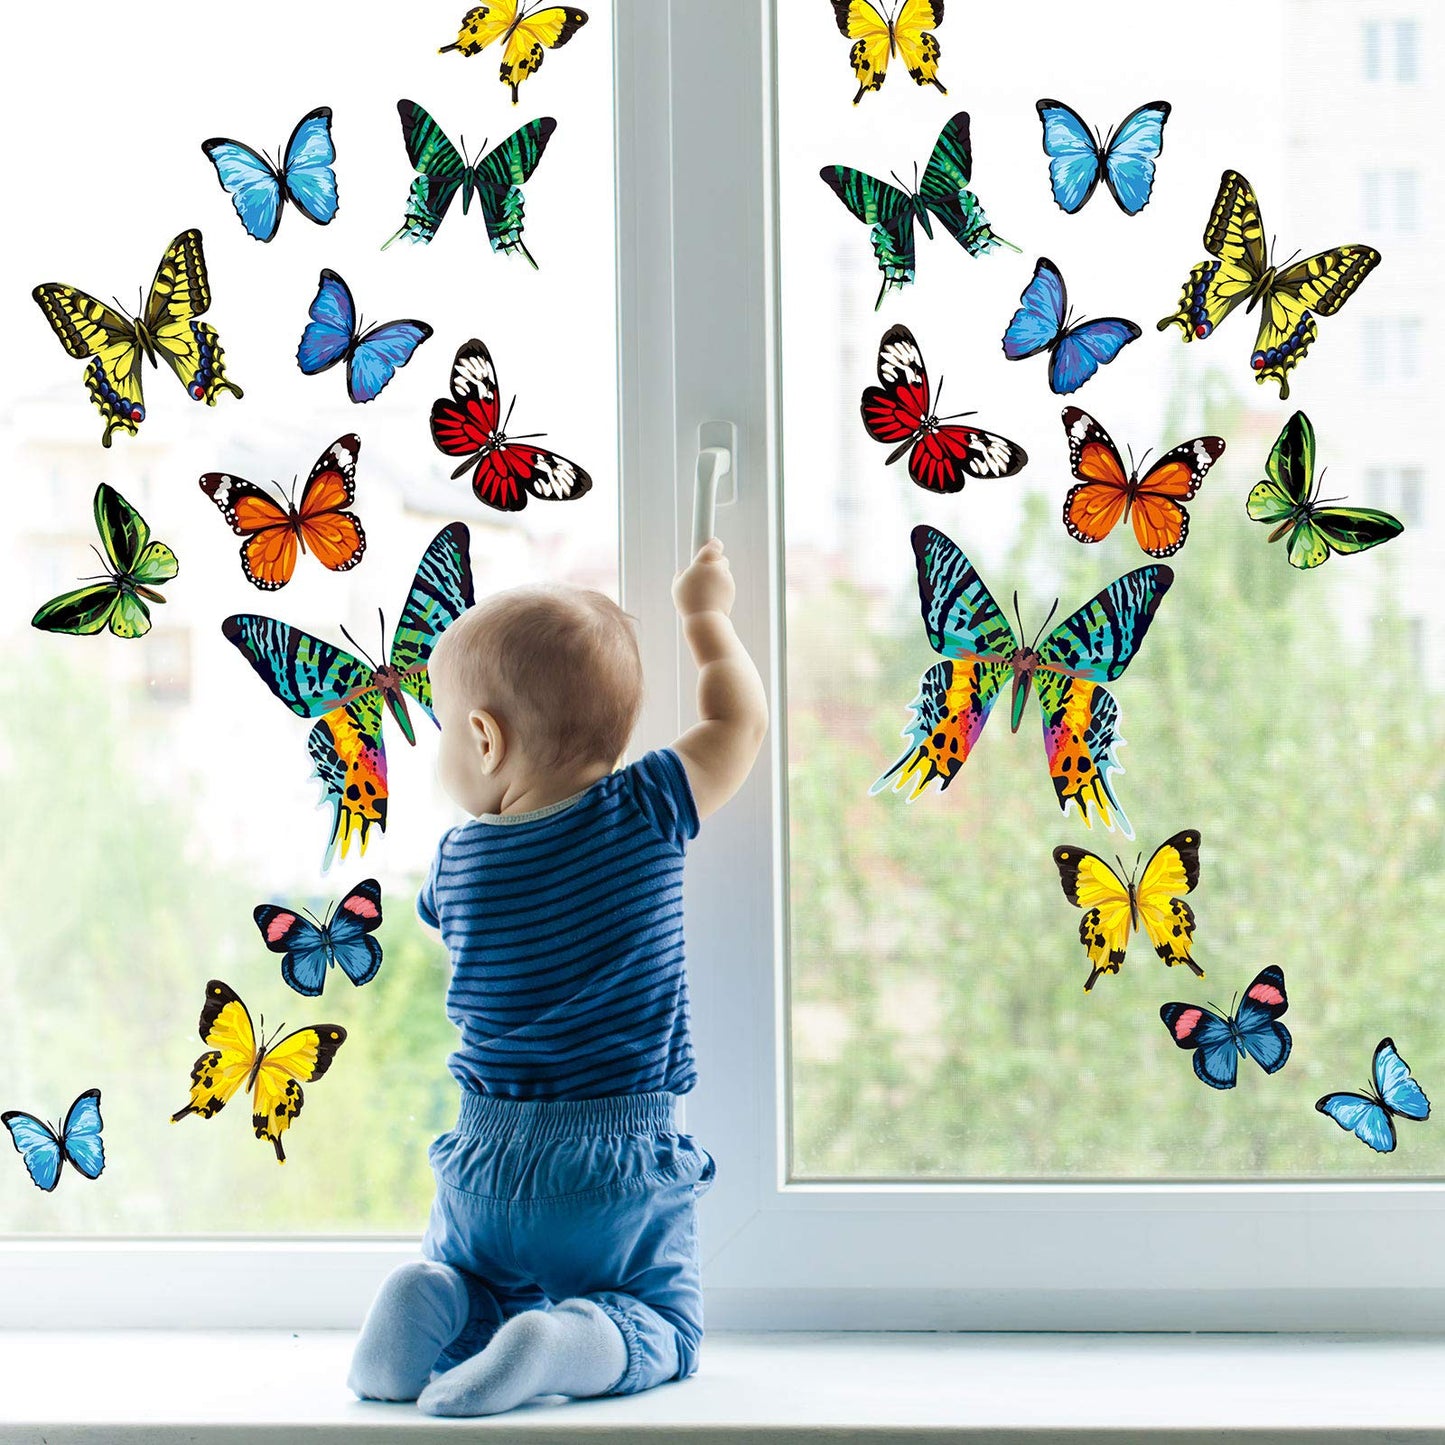 Whaline 24Pcs Colorful Butterfly Window Clings Double-Sided Anti-Collision Window Decals to Prevent Bird Strikes on Window Glass Non-Adhesive Static Butterfly Cling Stickers for Home Window Glass